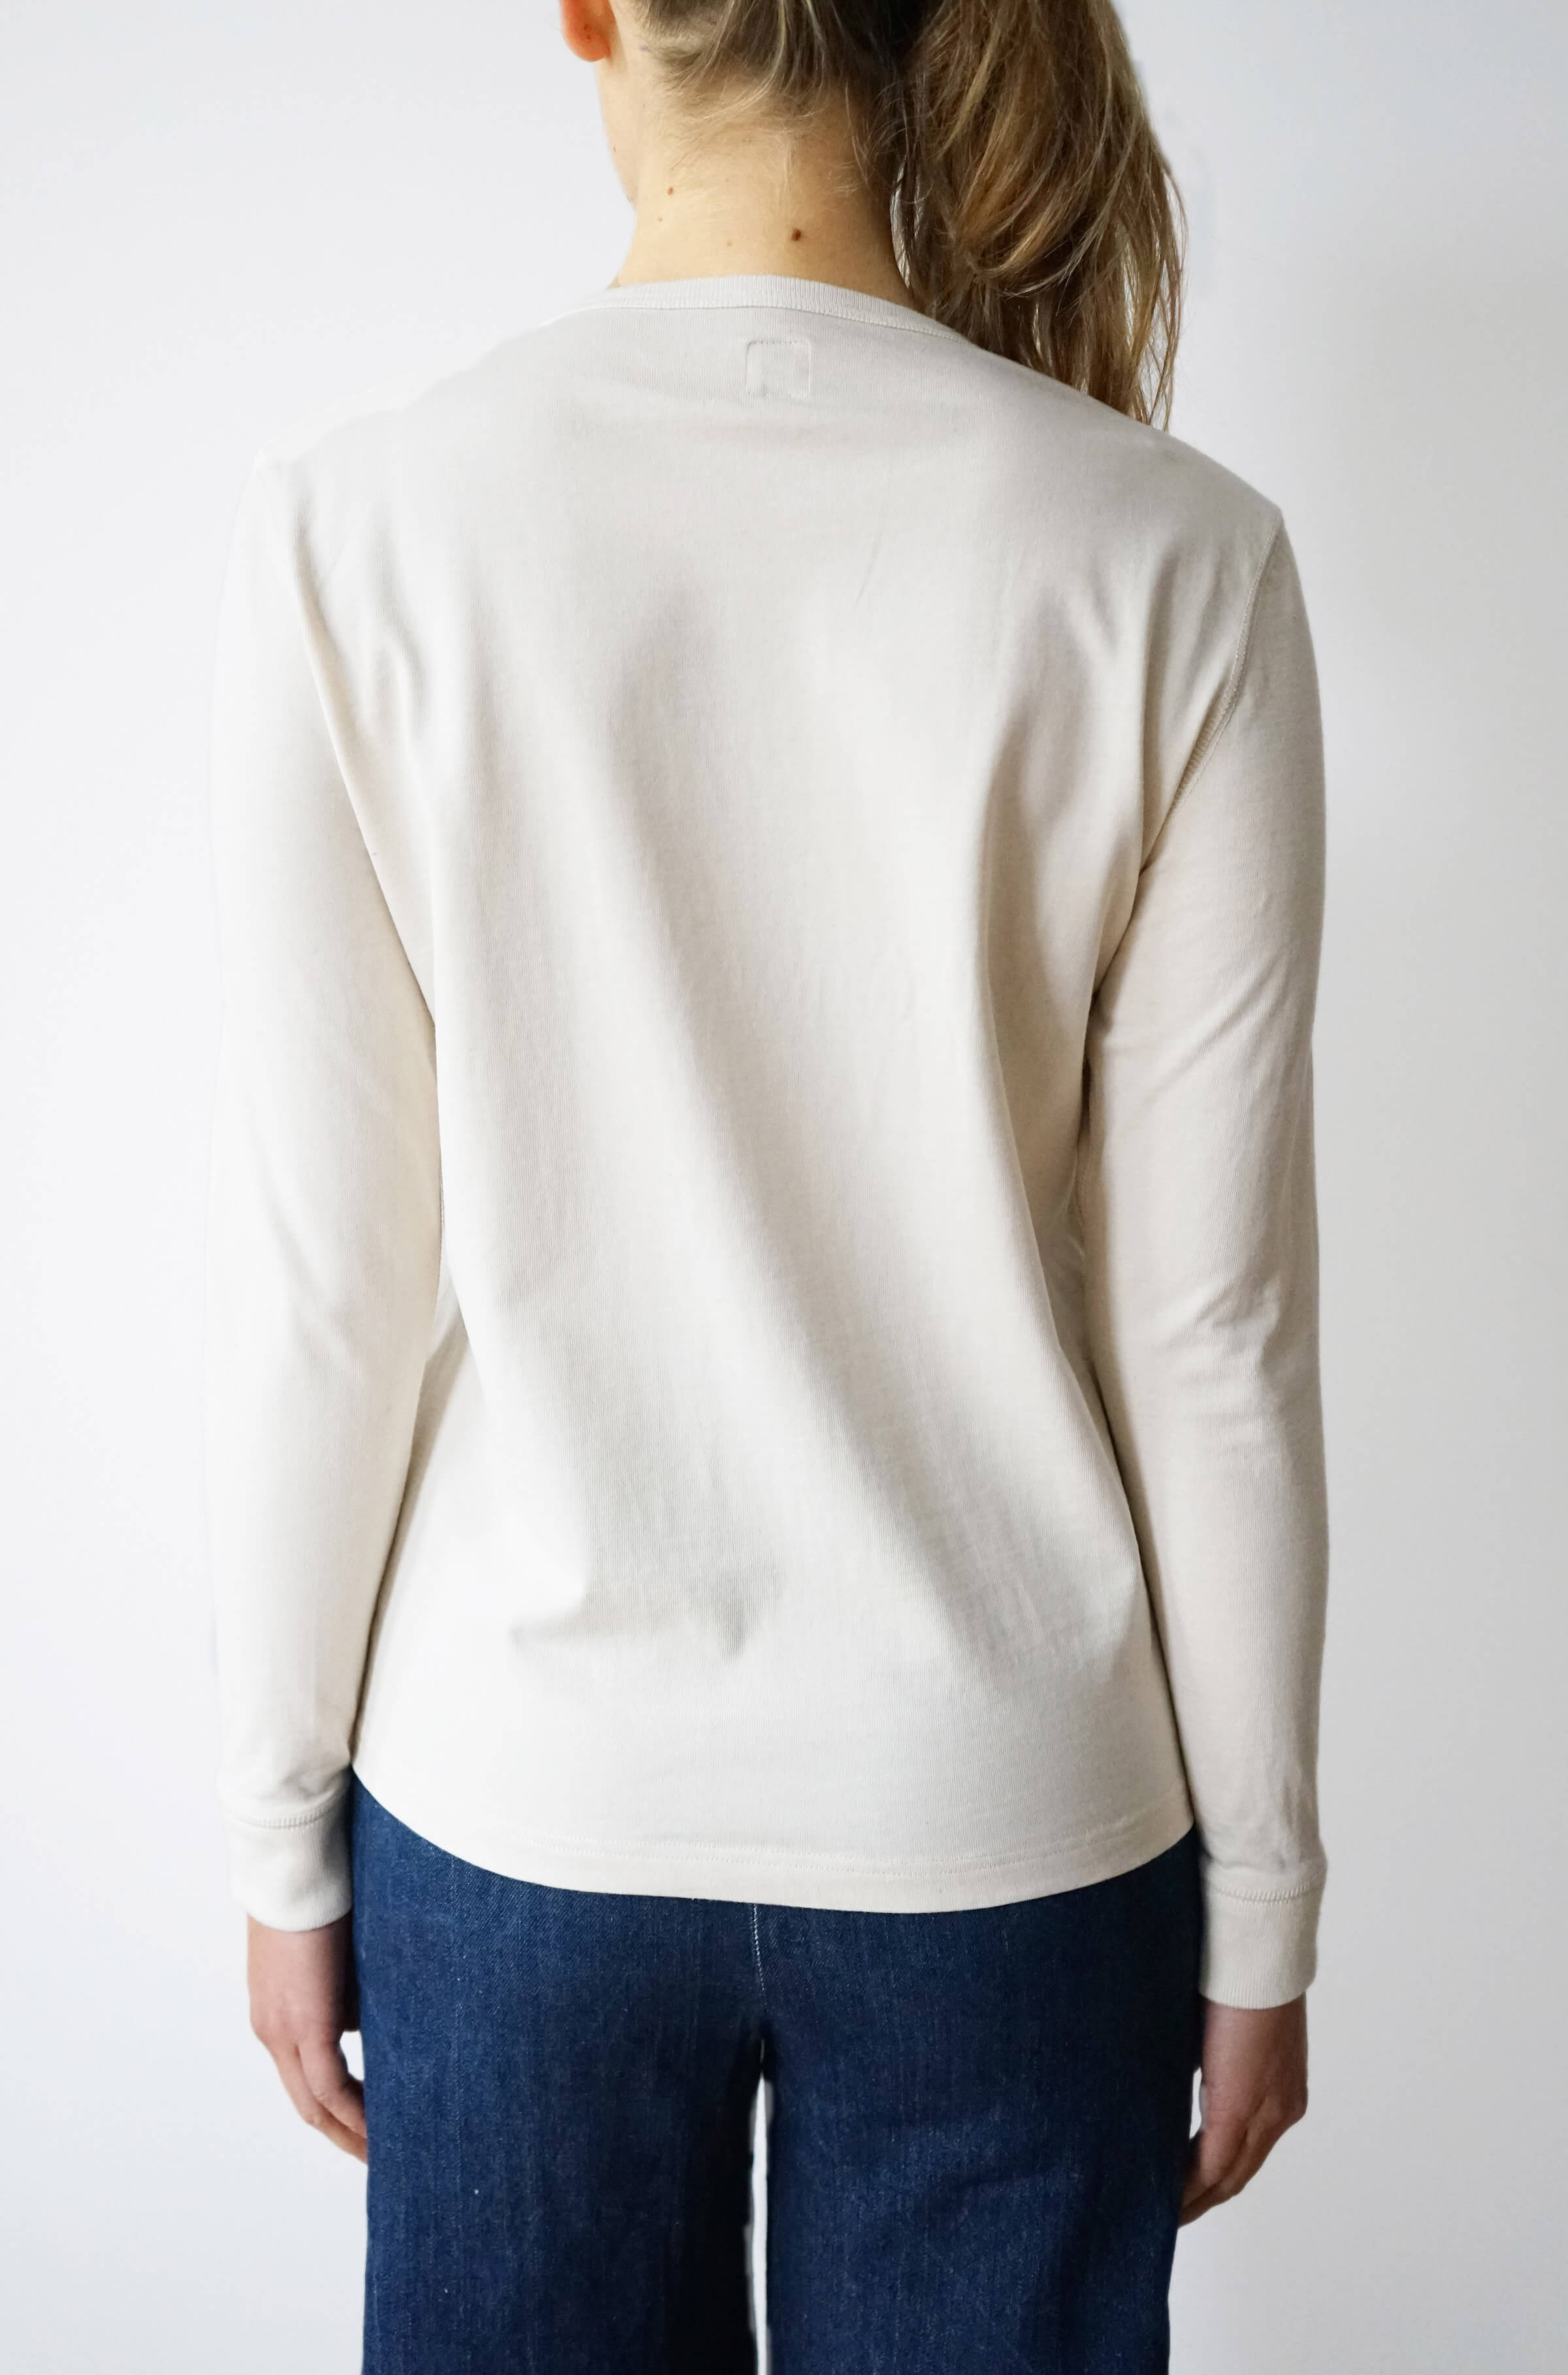 Durable Longsleeve made of Custom-Knitted Organic Cotton in Germany